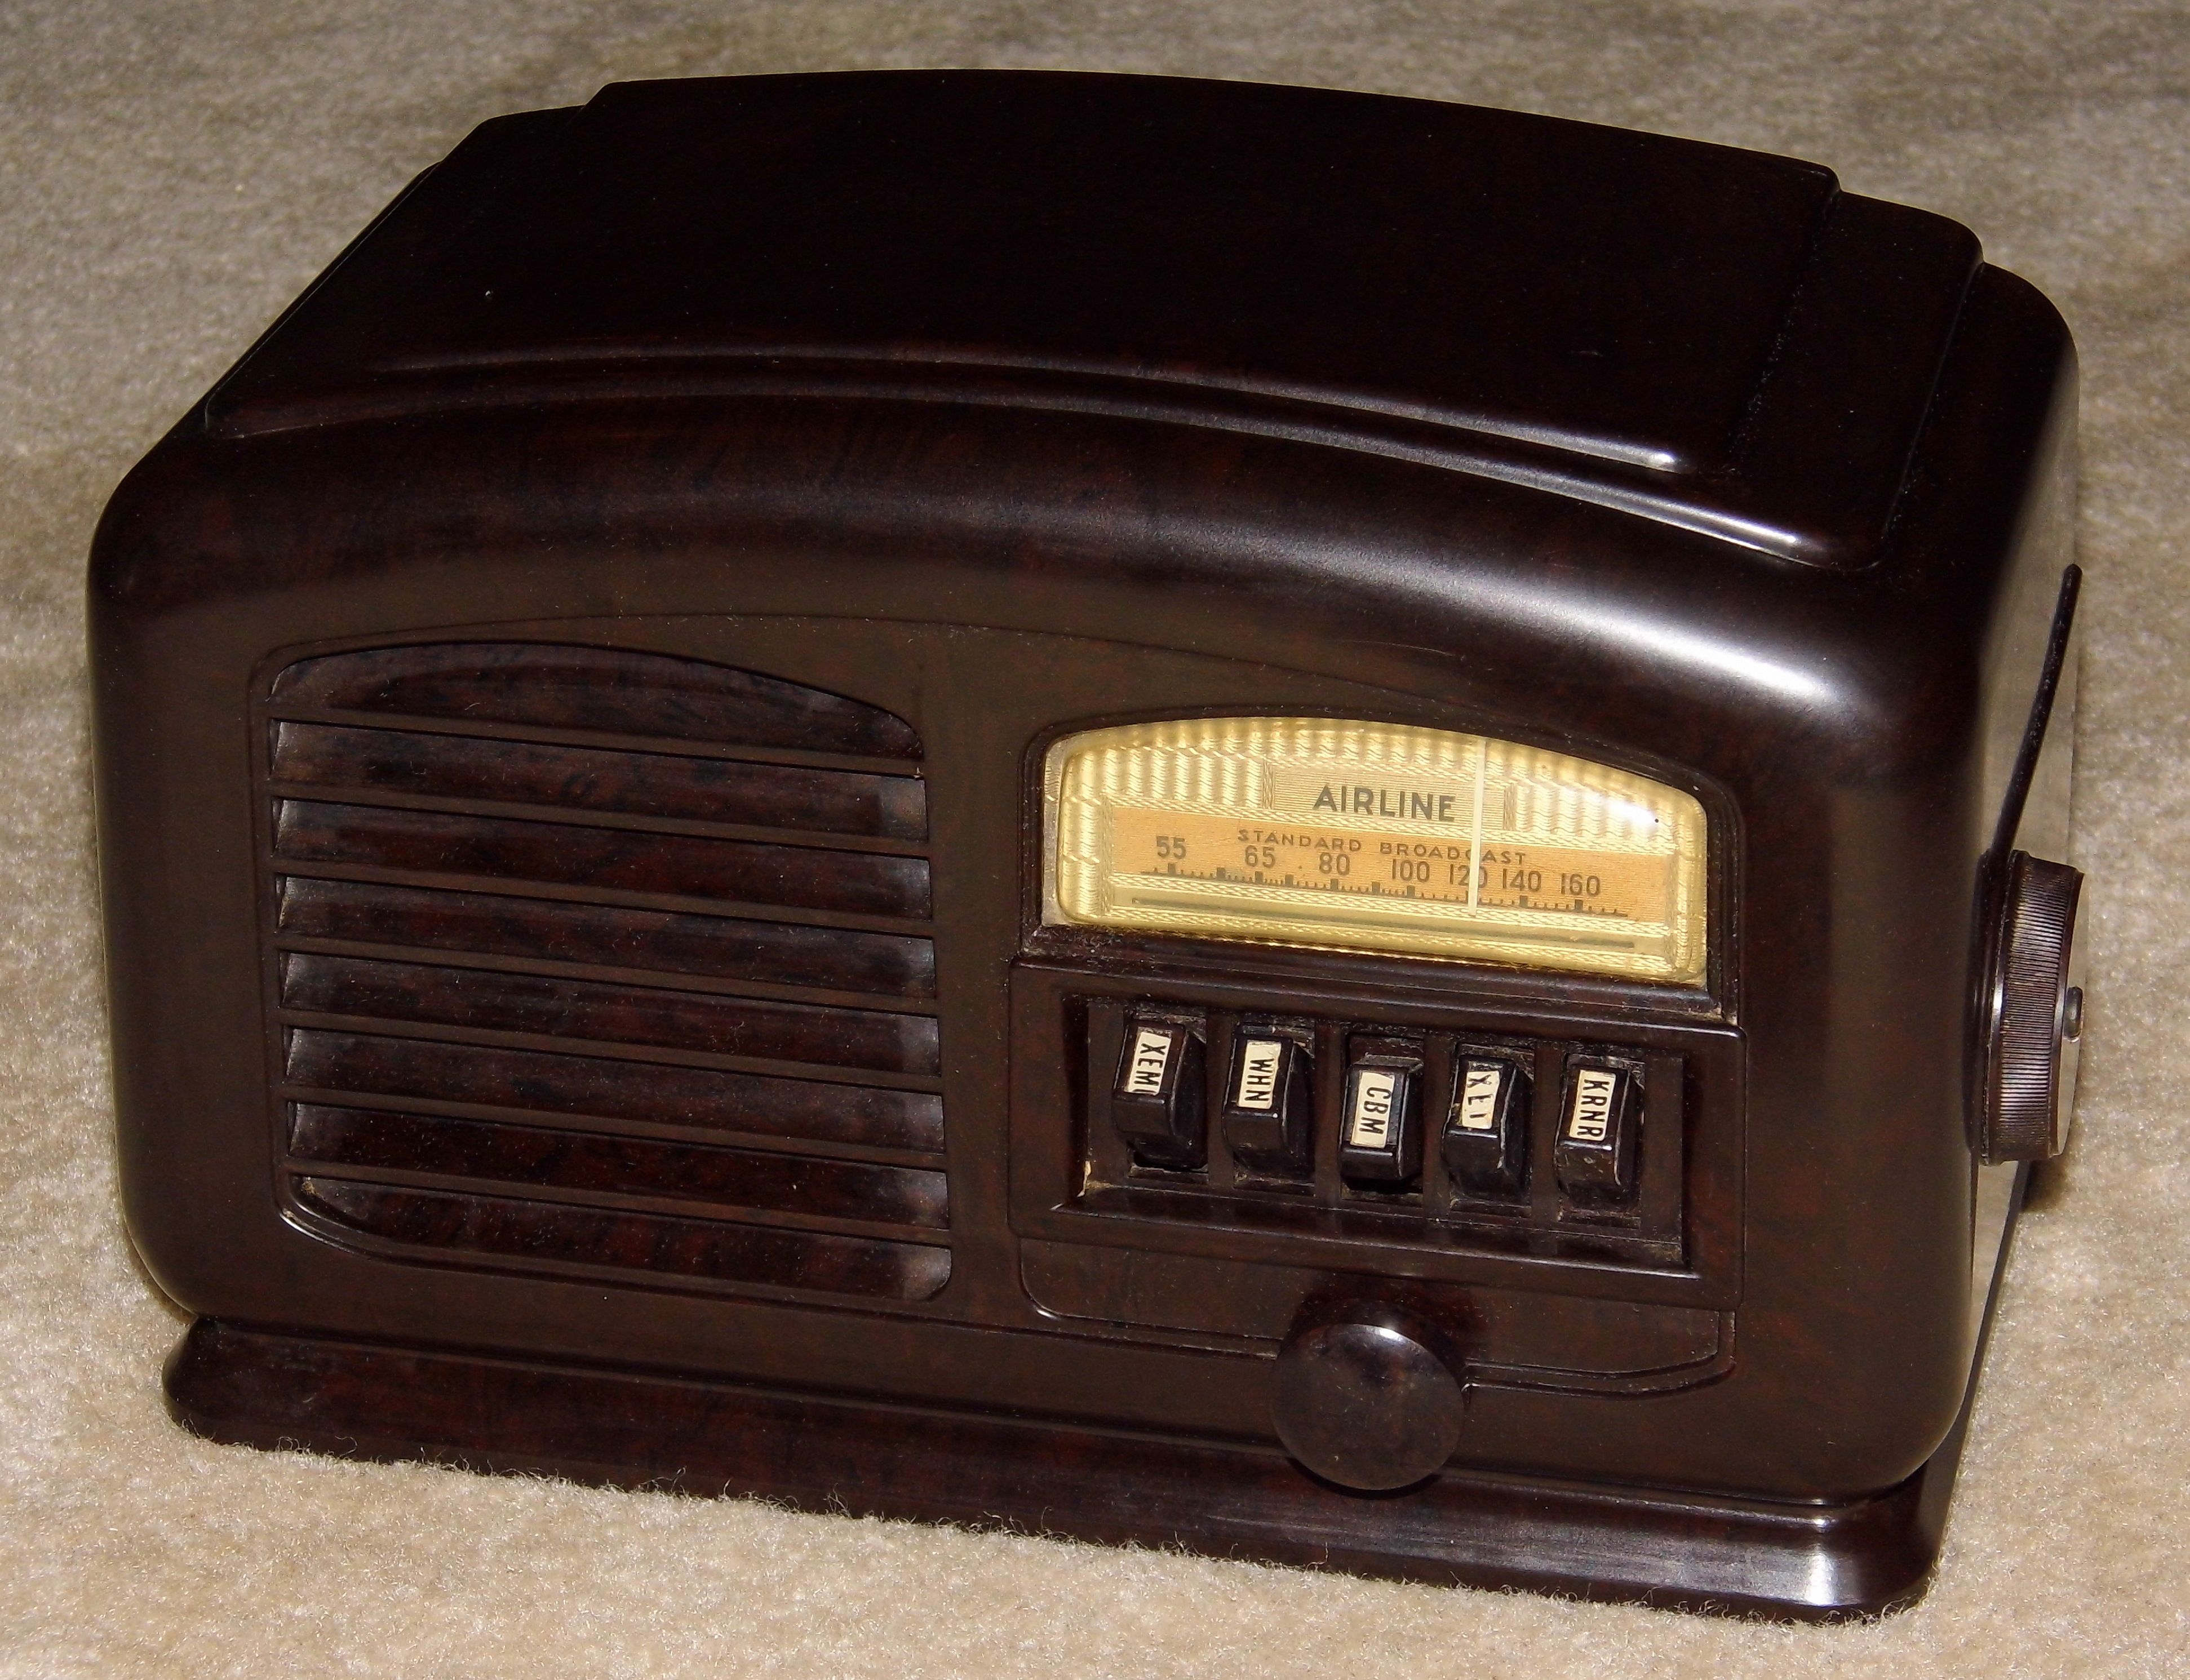 https://upload.wikimedia.org/wikipedia/commons/d/d4/Vintage_Wards_Airline_Push_Button_Table_Radio%2C_Deco_Style%2C_Model_04BR-513B%2C_5_Vacuum_Tubers%2C_AM_Band%2C_Circa_1941_%2814588620603%29.jpg